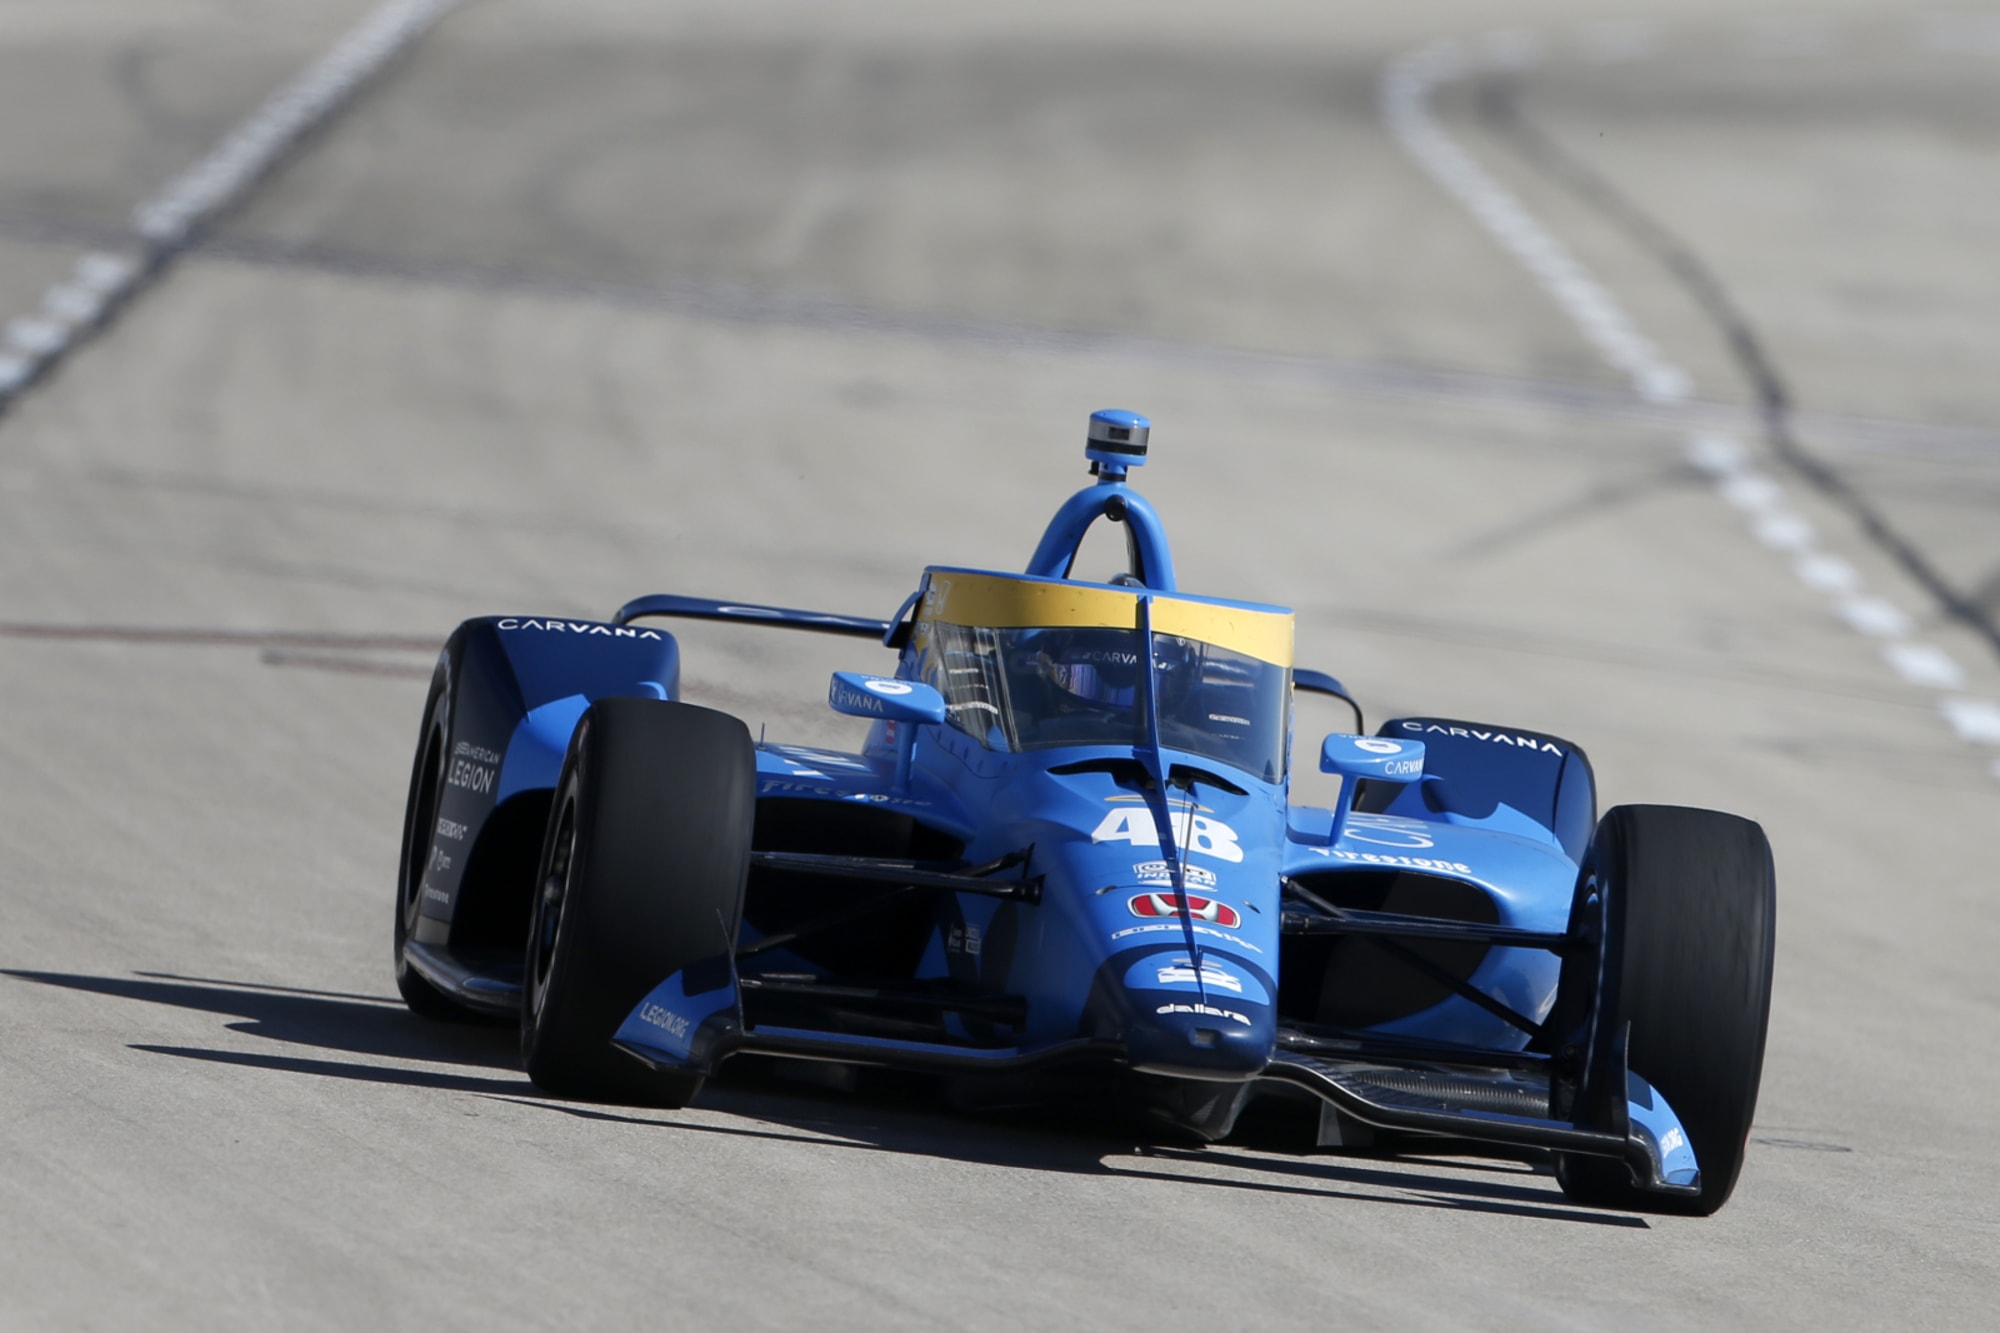 IndyCar: 3 possible oval drivers for Chip Ganassi Racing in 2023